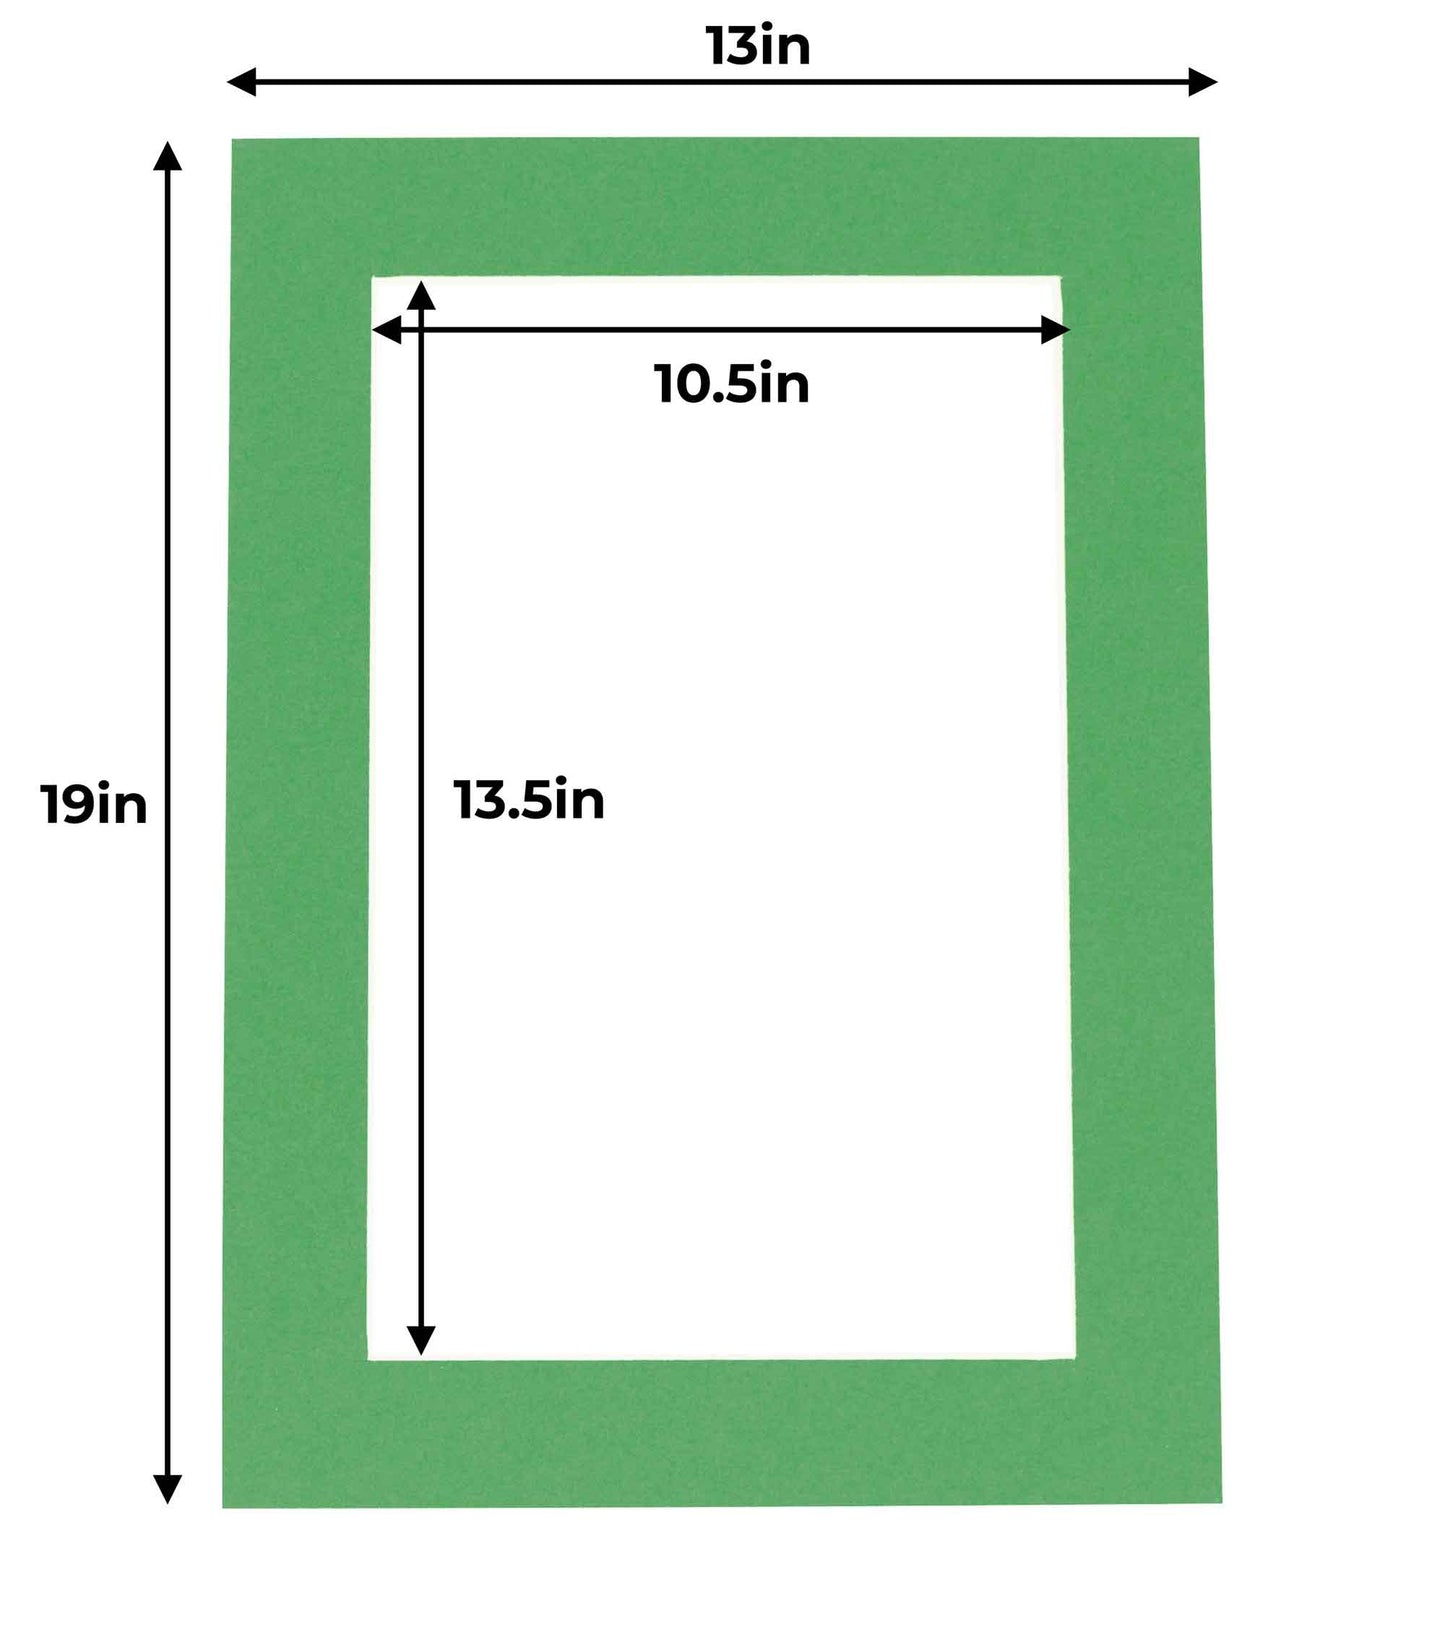 Pack of 10 Bright Green Precut Acid-Free Matboard Set with Clear Bags & Backings